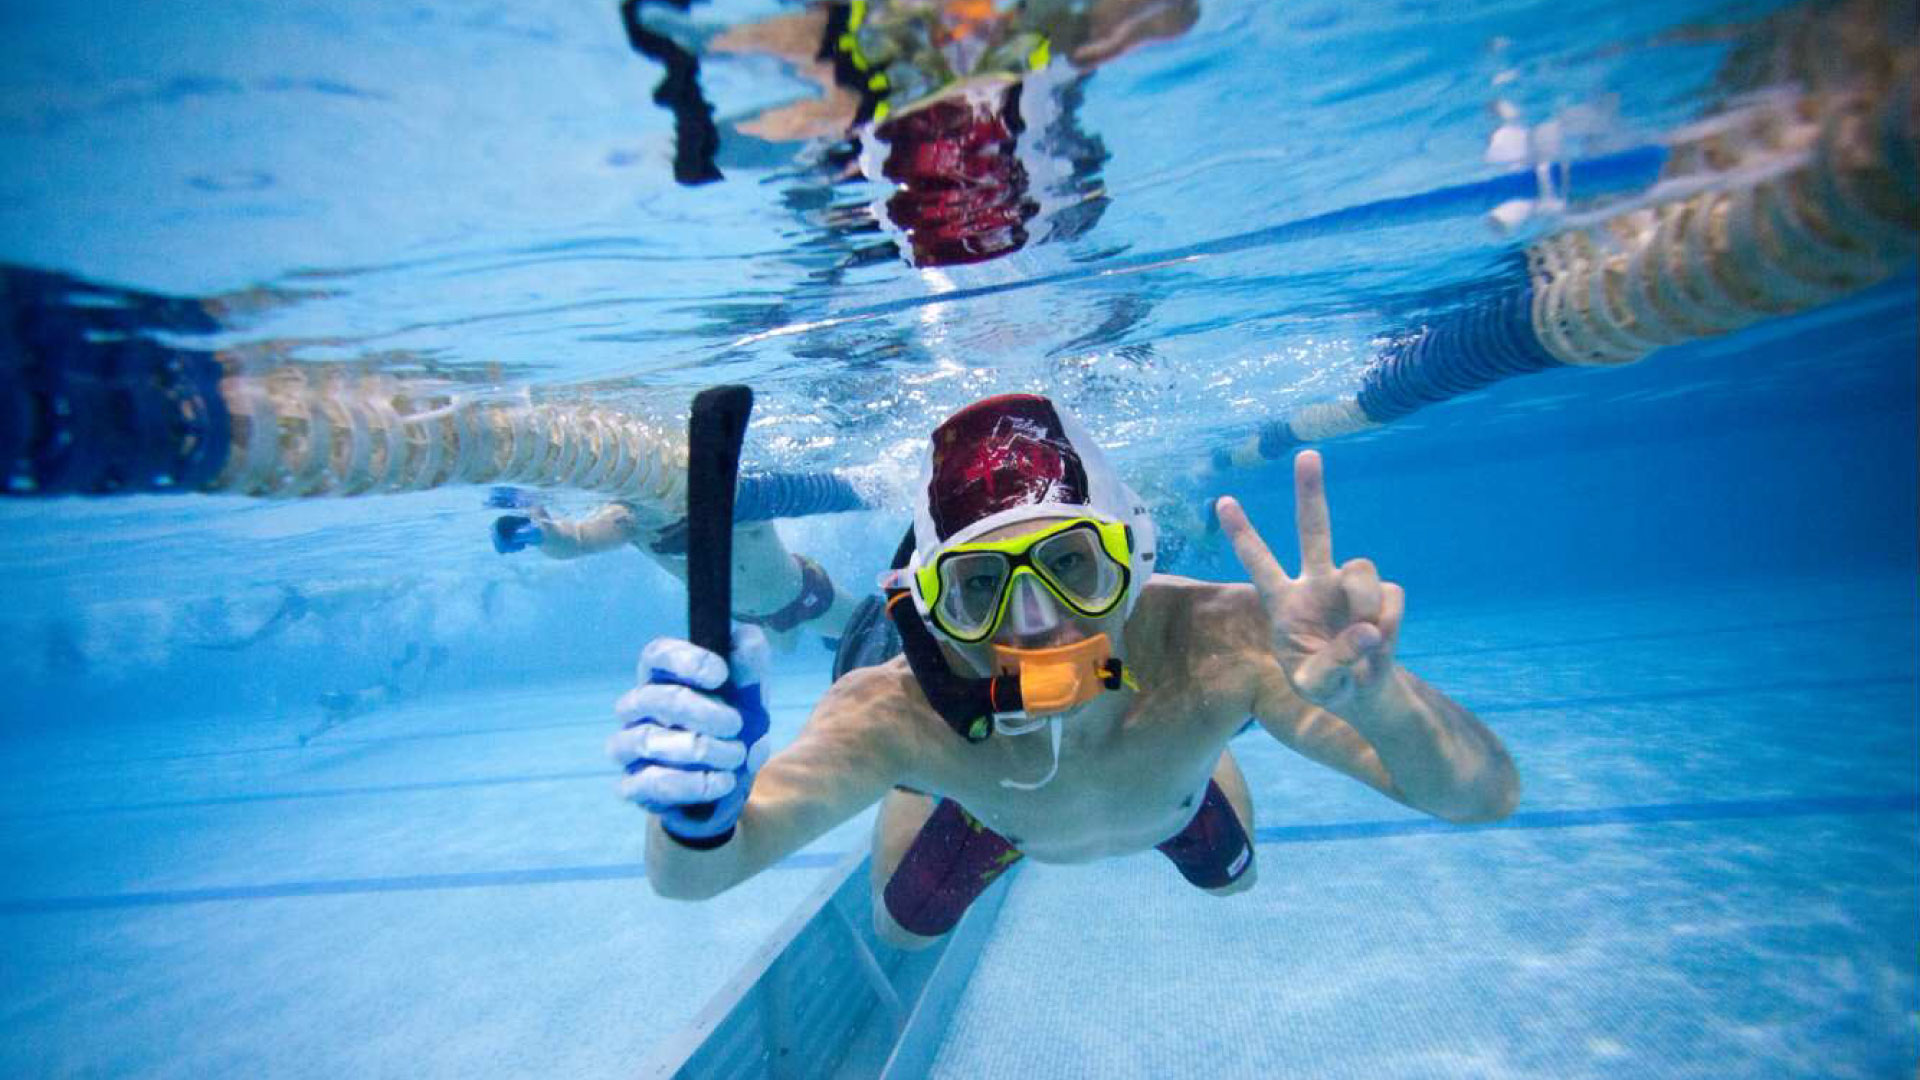 Underwater Hockey (Octopush) History, Elements & How to Play